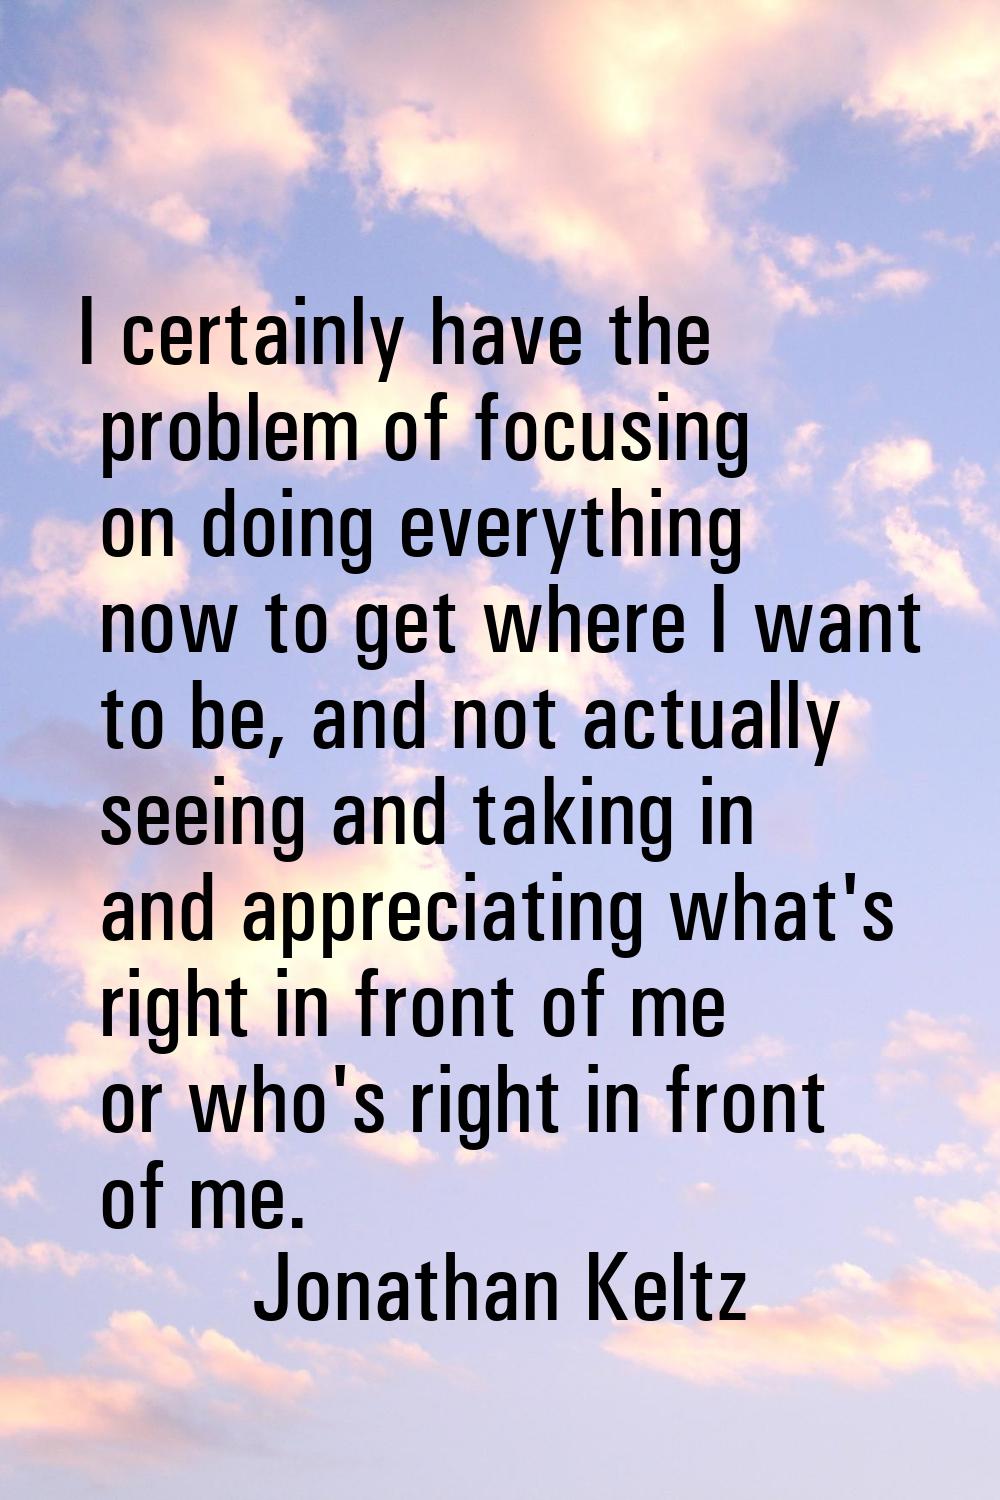 I certainly have the problem of focusing on doing everything now to get where I want to be, and not